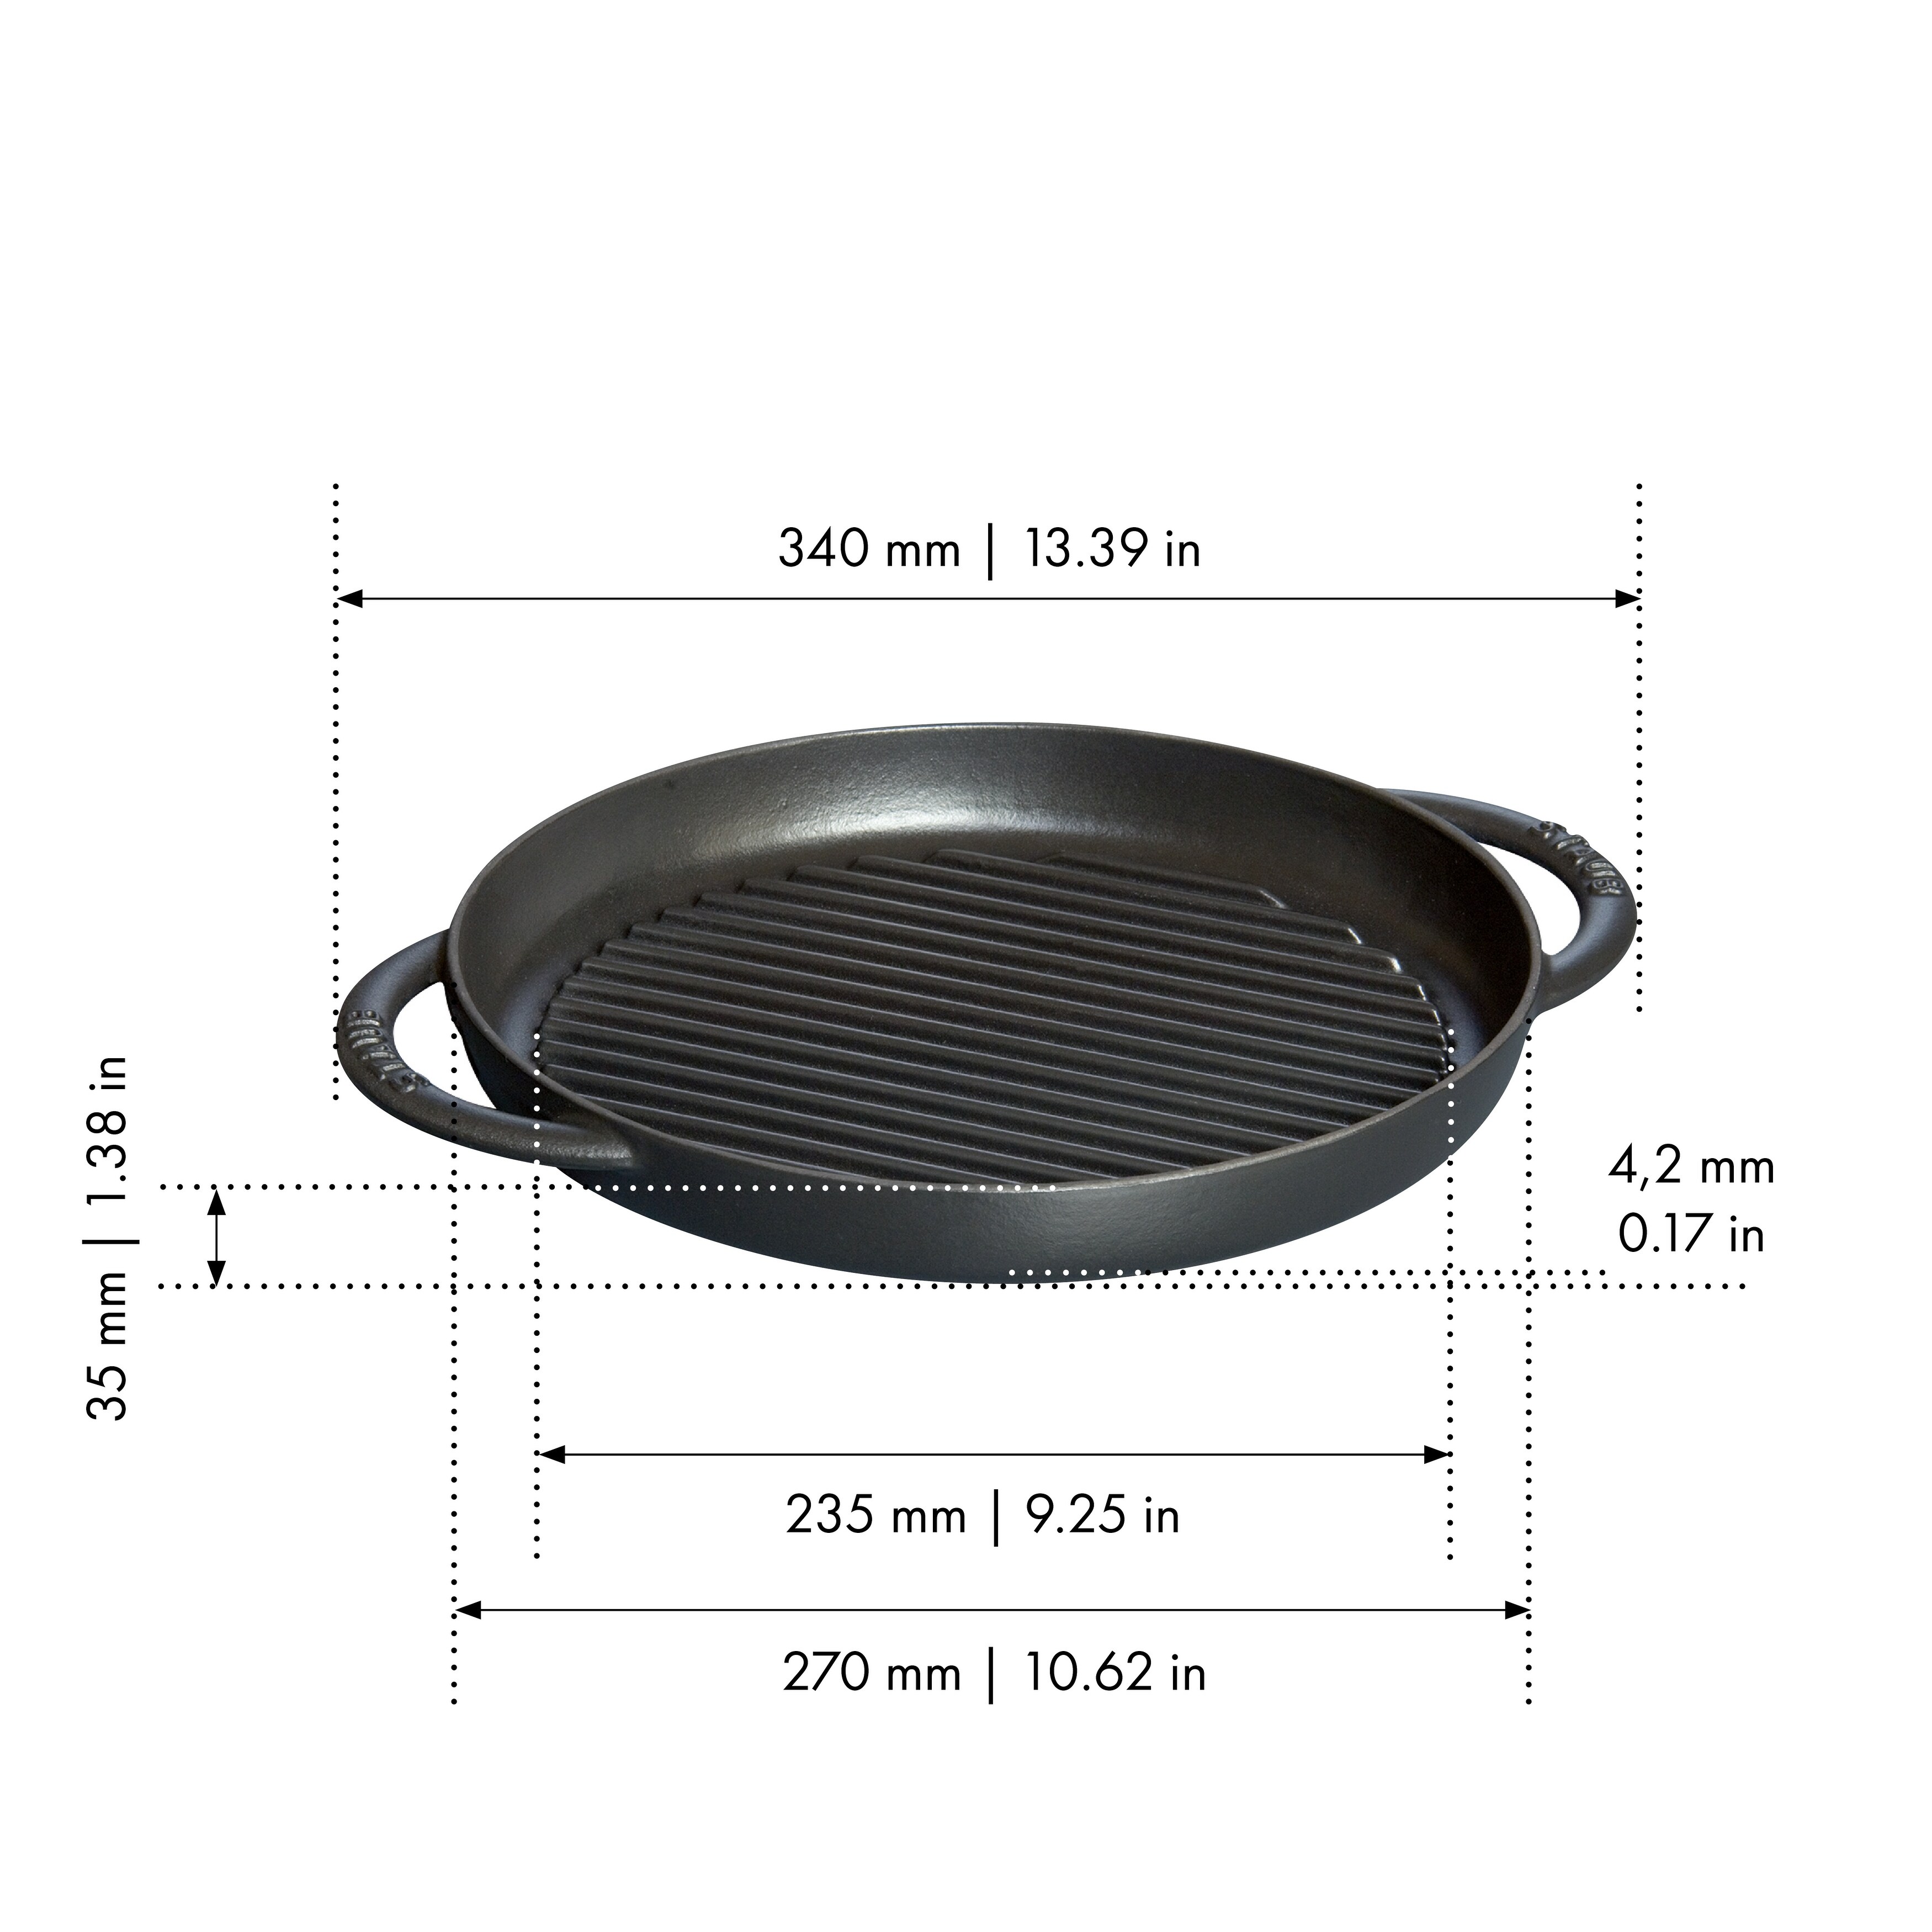 Pur-Well Living Pur Cast Iron Extra Large, Pre-Seasoned, Pan 12-inch